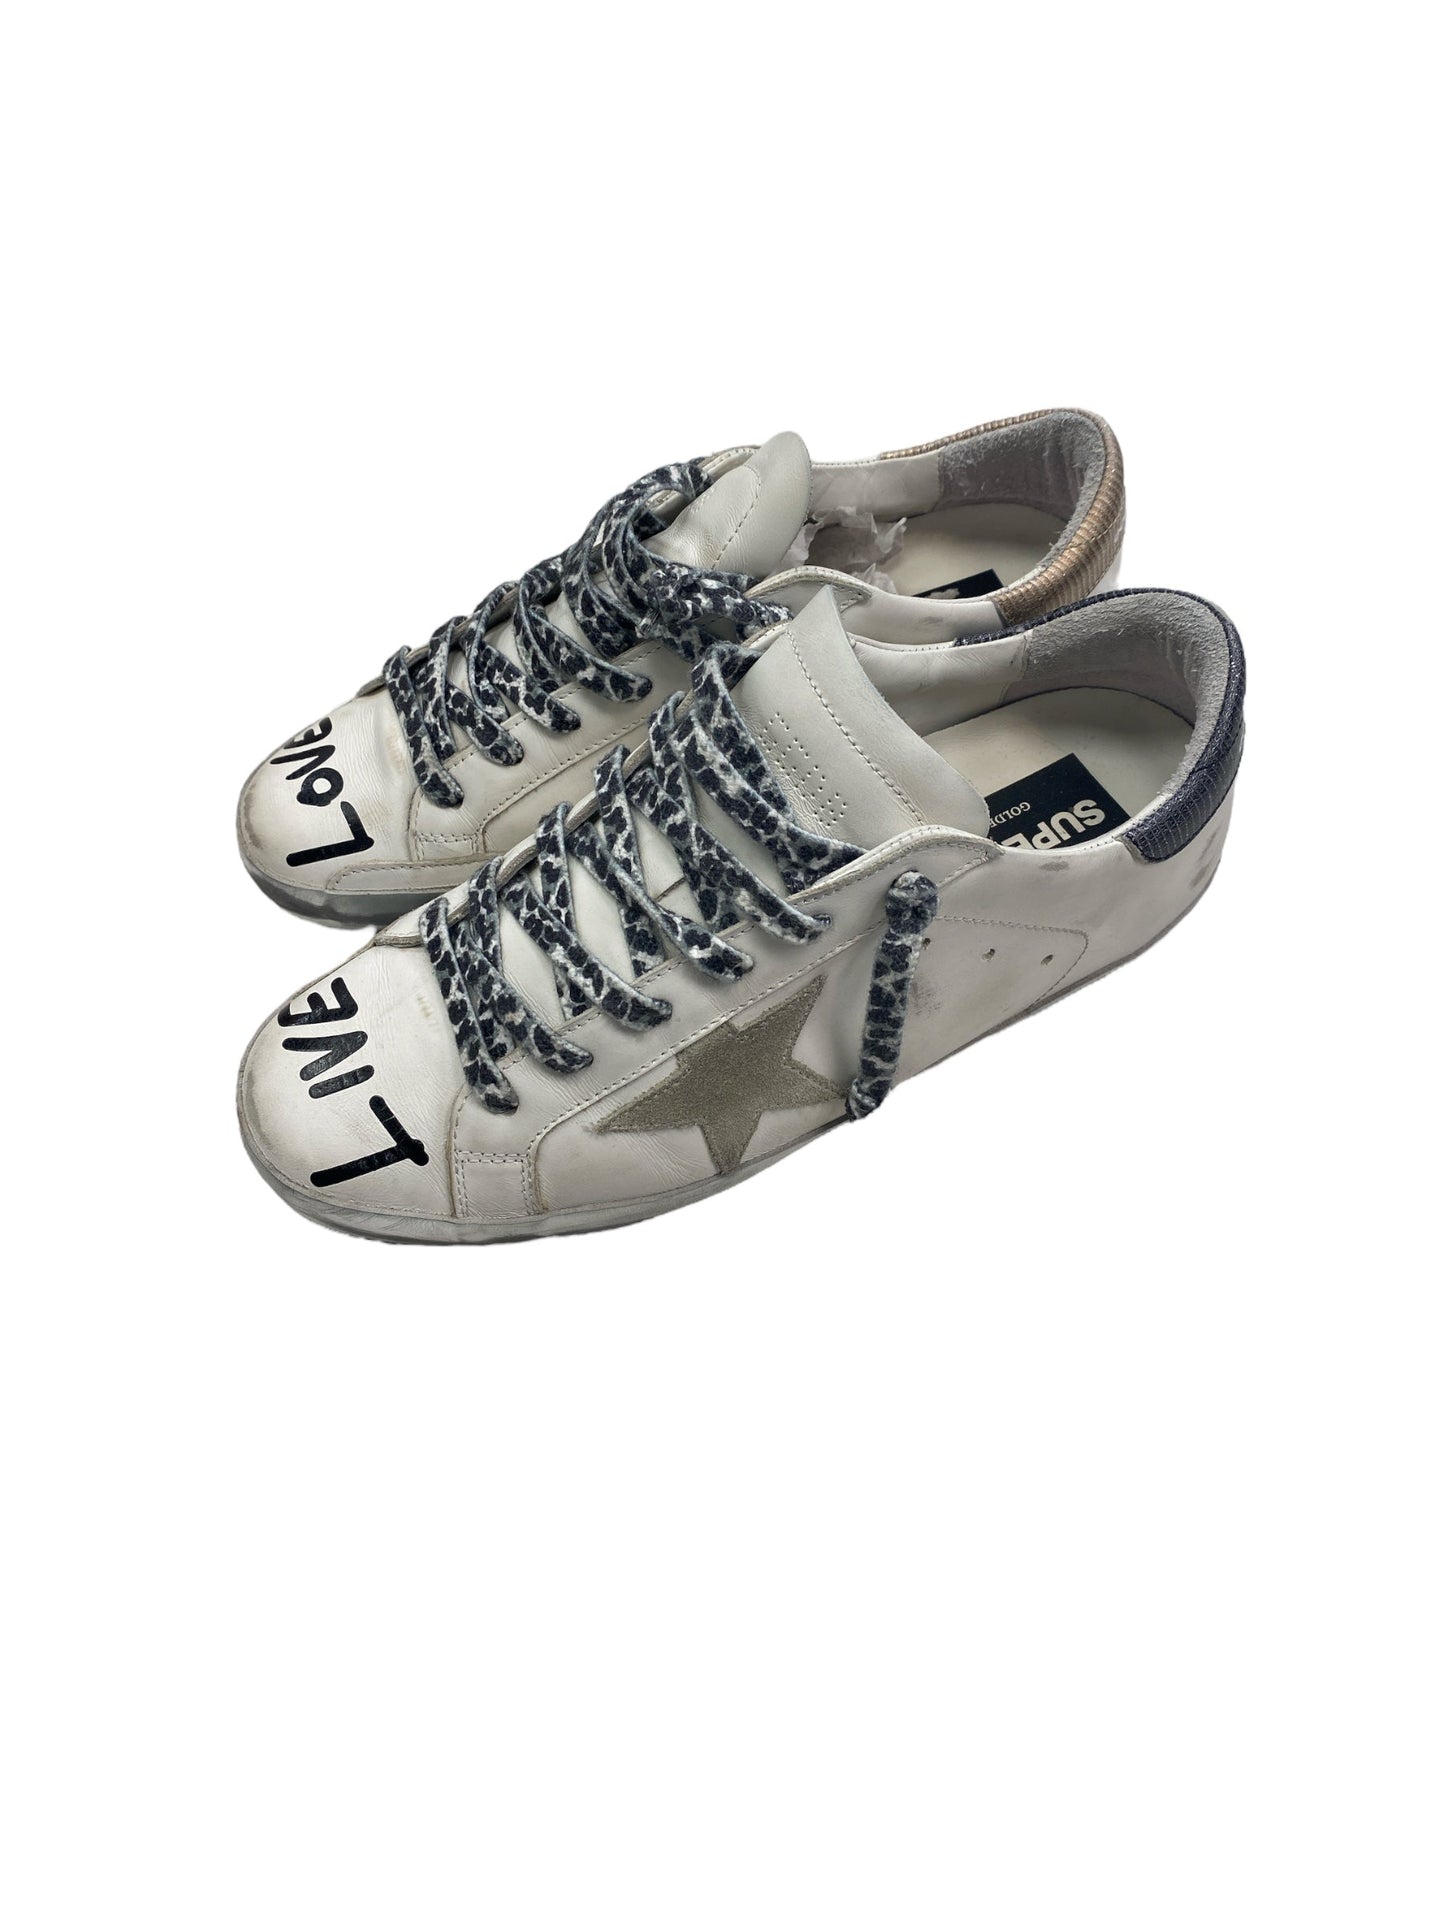 Shoes Luxury Designer By Golden Goose Size:41